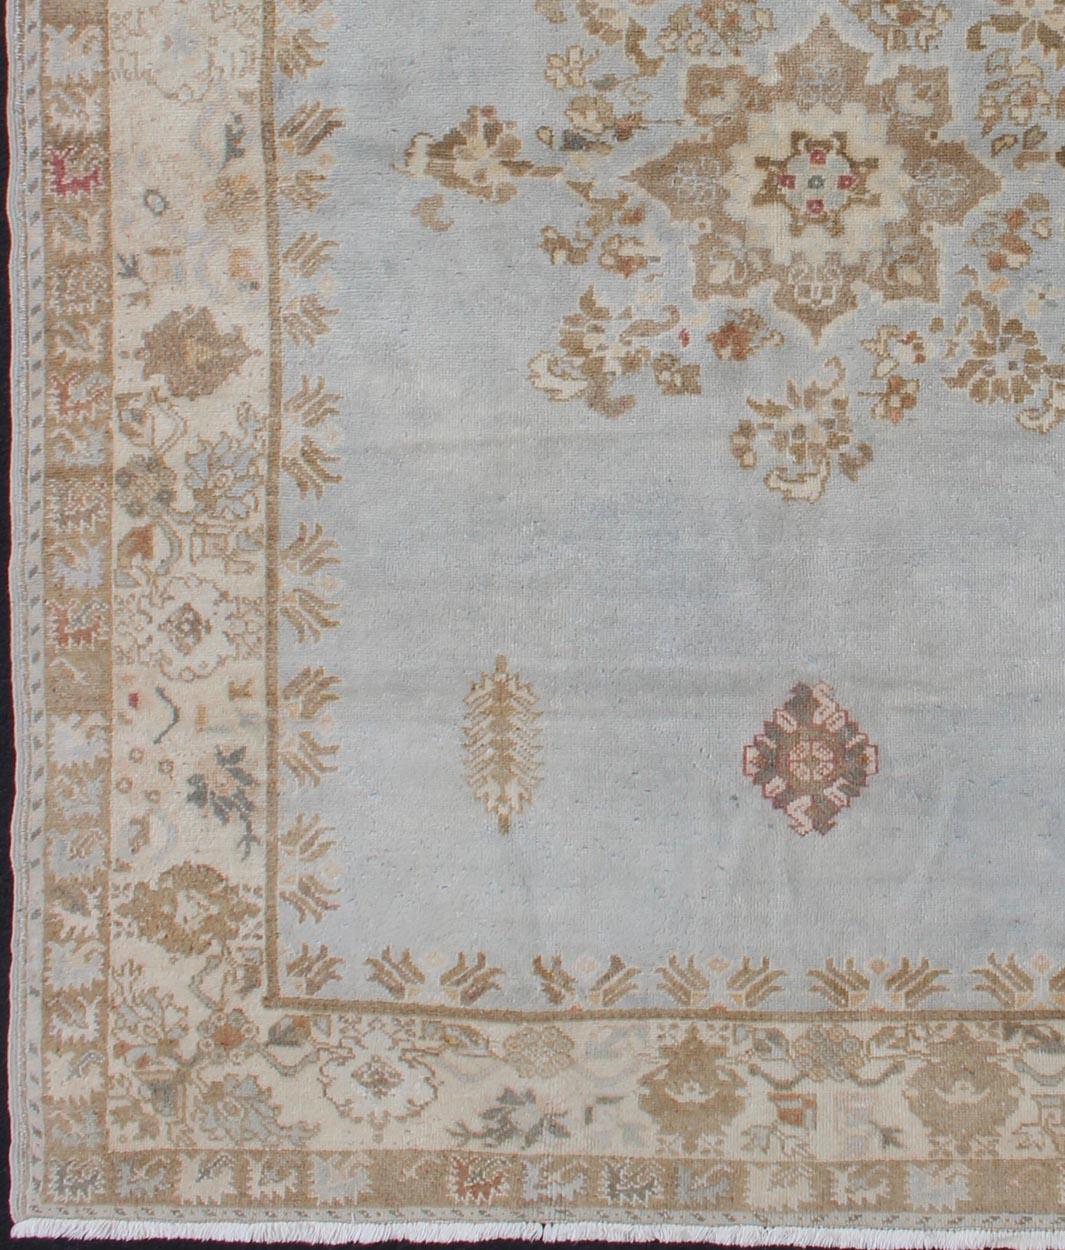 Elegant vintage Moroccan rug in pale blue, taupe and light brown
Central Medallion design Moroccan rug, Keivan Woven Arts /rug #13-0605 , country of origin / type: Morocco / Tribal, circa 1960

Measures: 5'8 x 8'3

This Moroccan rug features an